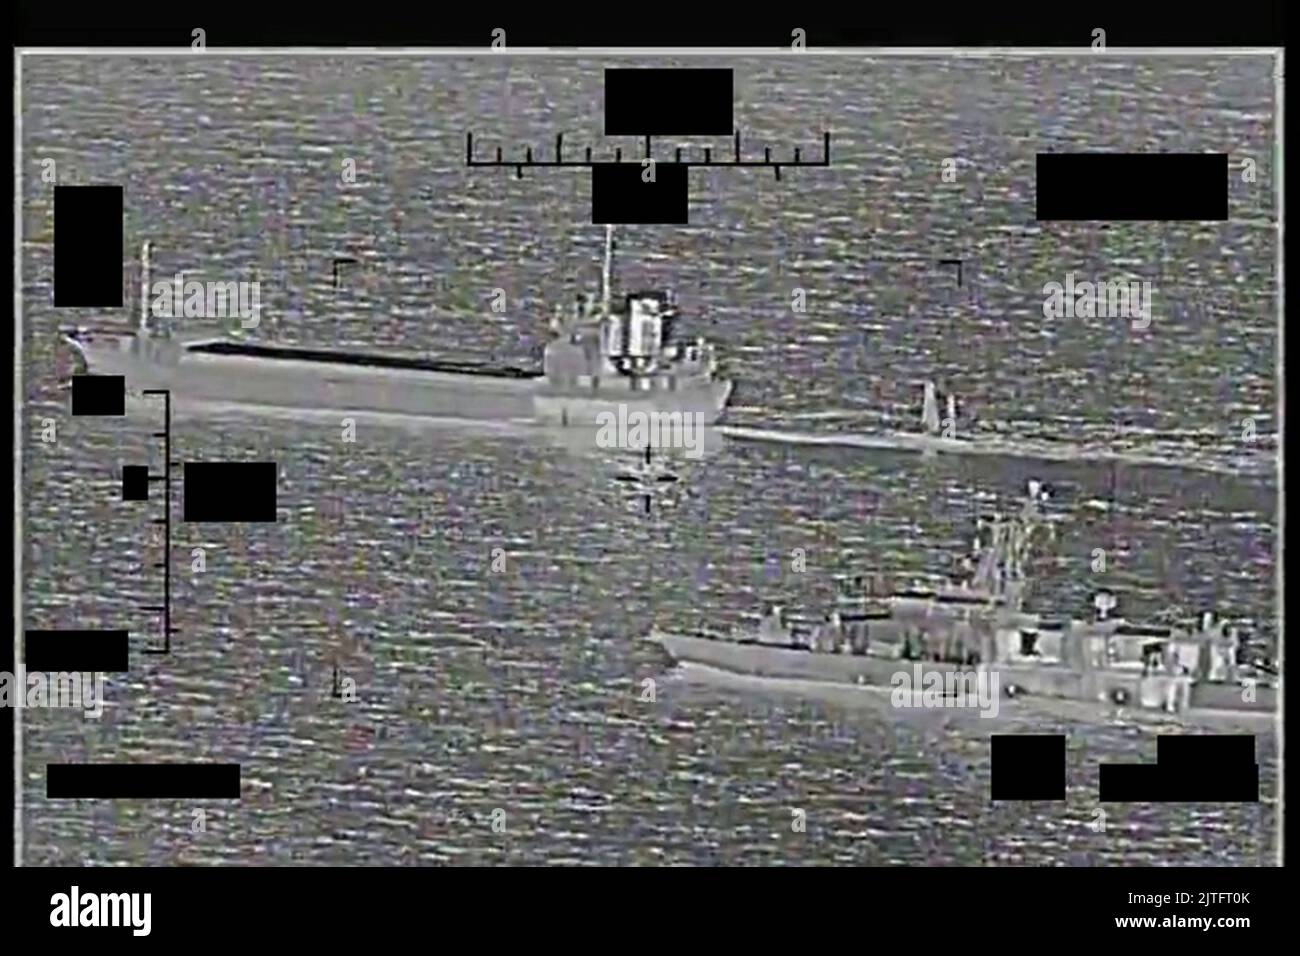 The U.S. Navy prevented a support ship, the Shahid Baziar, left, belonging to Iran's Islamic Revolutionary Guard Corps Navy (IRGCN), from capturing an unmanned surface vessel (USV) operated by the U.S. 5th Fleet in the Arabian Gulf on August 29-30, 2022. The actions taken by U.S. naval forces in response resulted in the IRGCN vessel disconnecting the towing line to the USV and departing the area approximately four hours later. The U.S. Navy resumed operations without further incident. The U.S. Navy patrol coastal ship USS Thunderbolt (PC 12), seen here in a screenshot taken from a video, appro Stock Photo